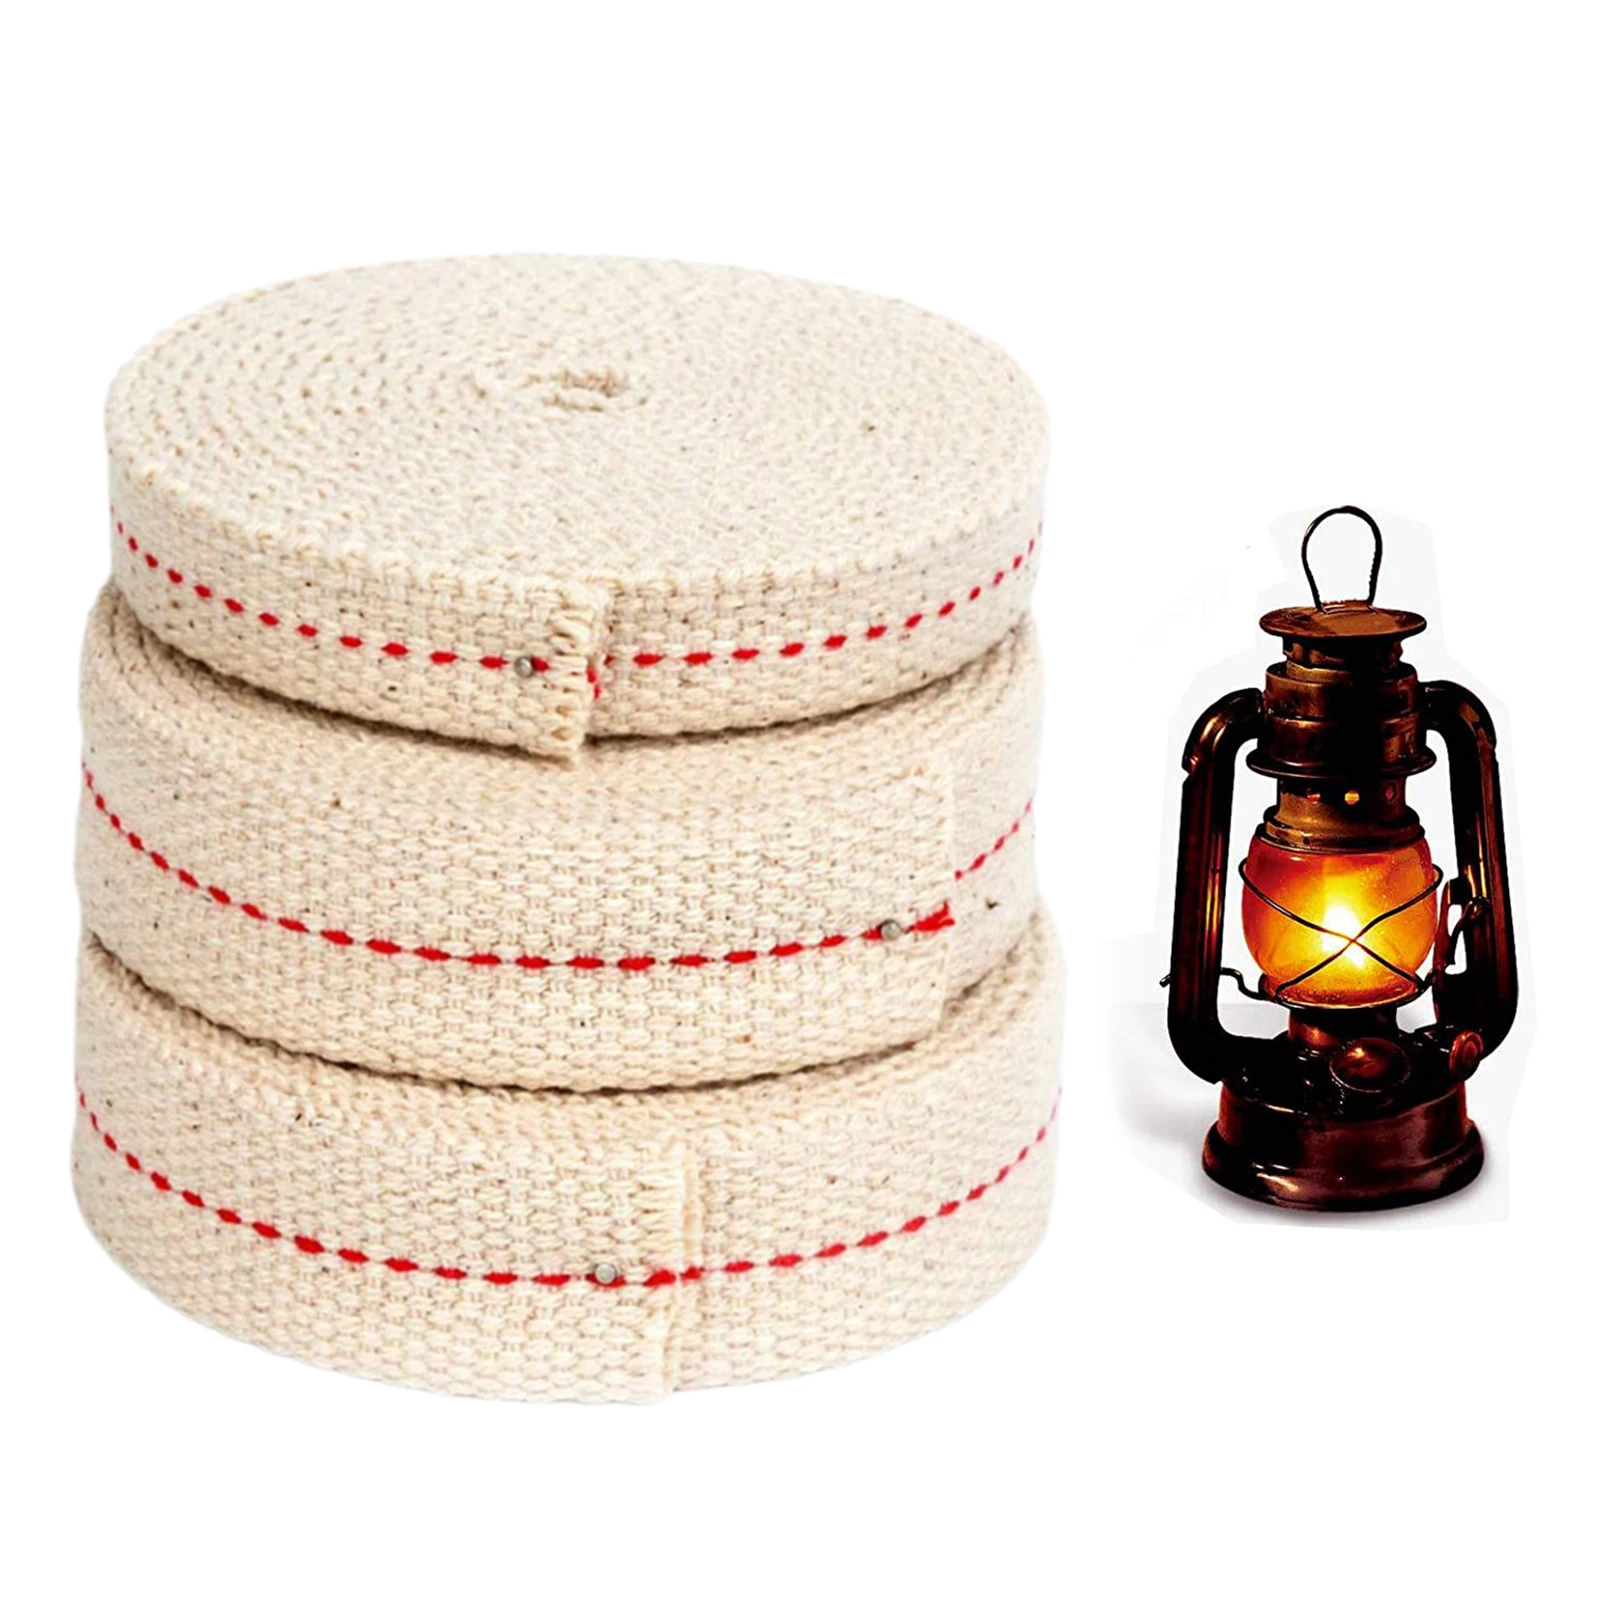 3 Rolls Cotton Oil Lamp Wick Flat Oil Lantern Wick for Oil Lamps and Oil Burners, 6.5Feet (Red)